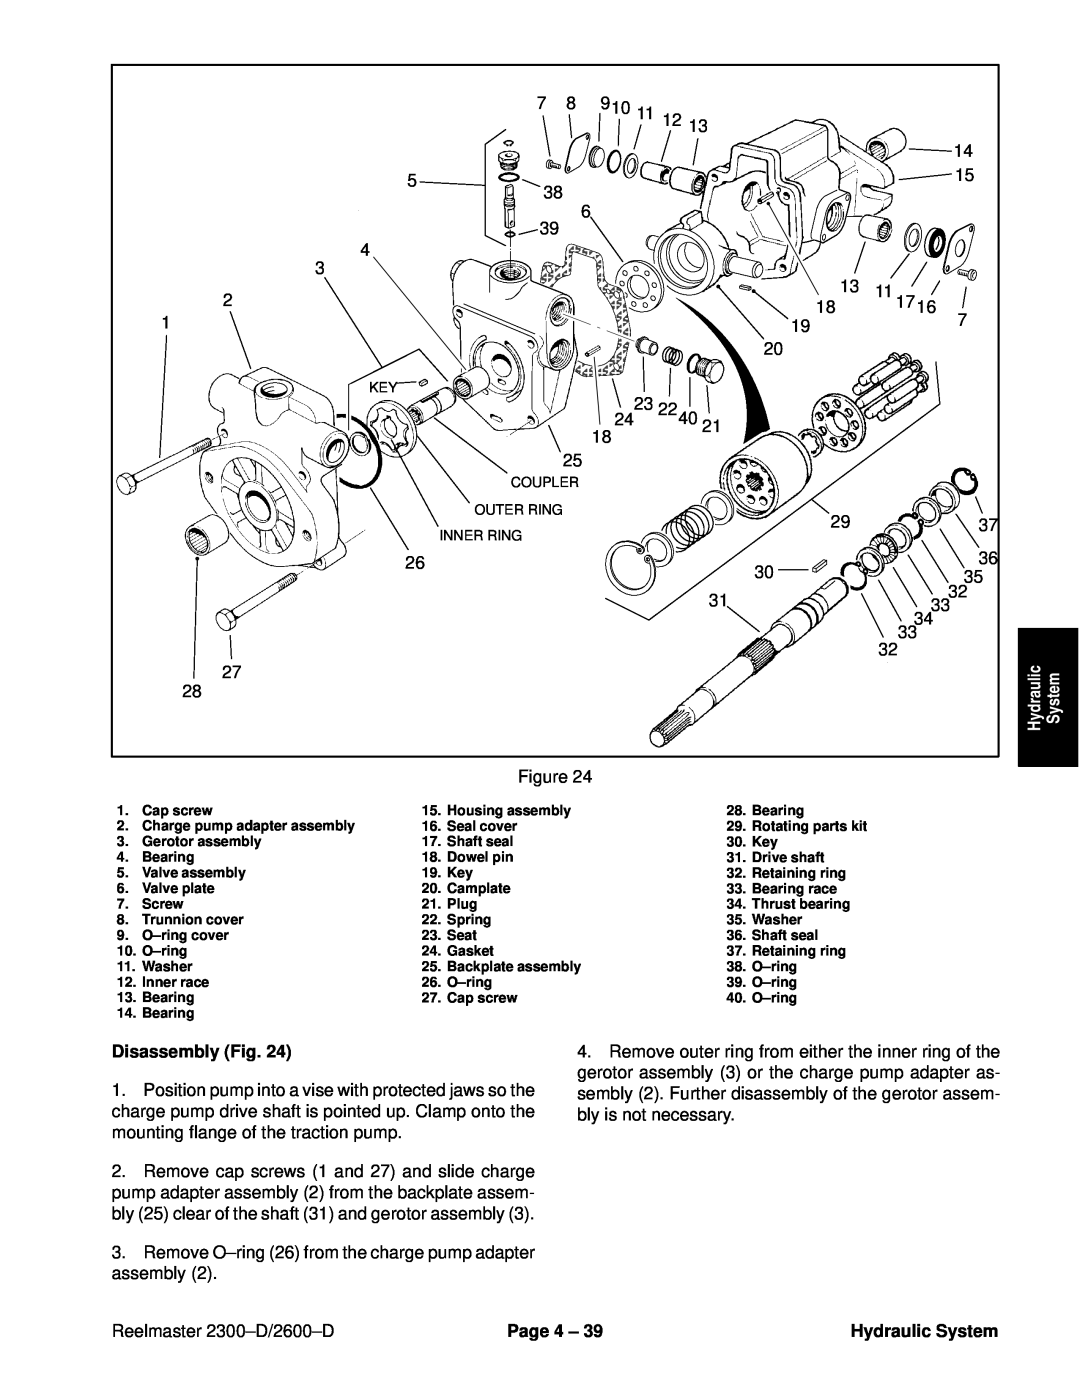 Toro 2600D Disassembly Fig, Remove O±ring 26 from the charge pump adapter assembly, Reelmaster 2300±D/2600±D, Page 4 ± 